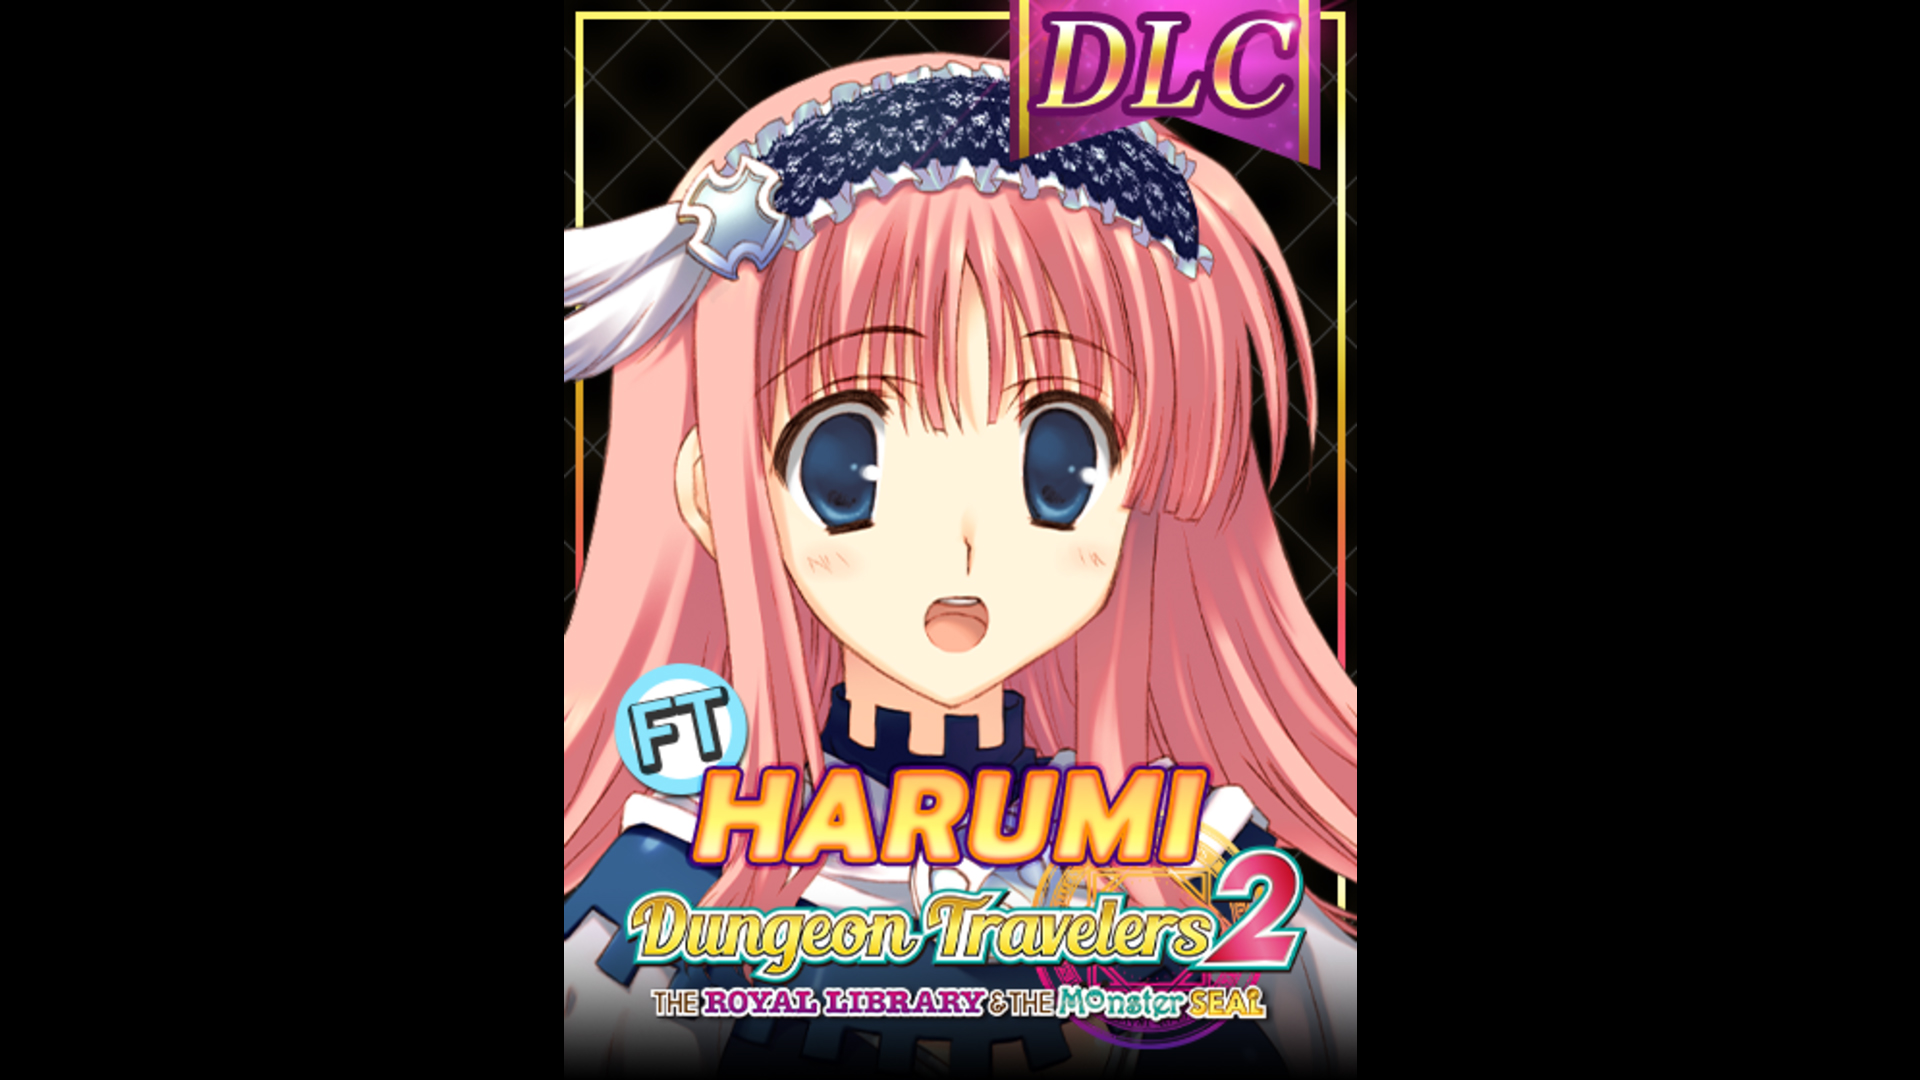 DLC - To Heart 2 Character: Fighter Harumi (Dungeon Travelers 2) - RPG - 1